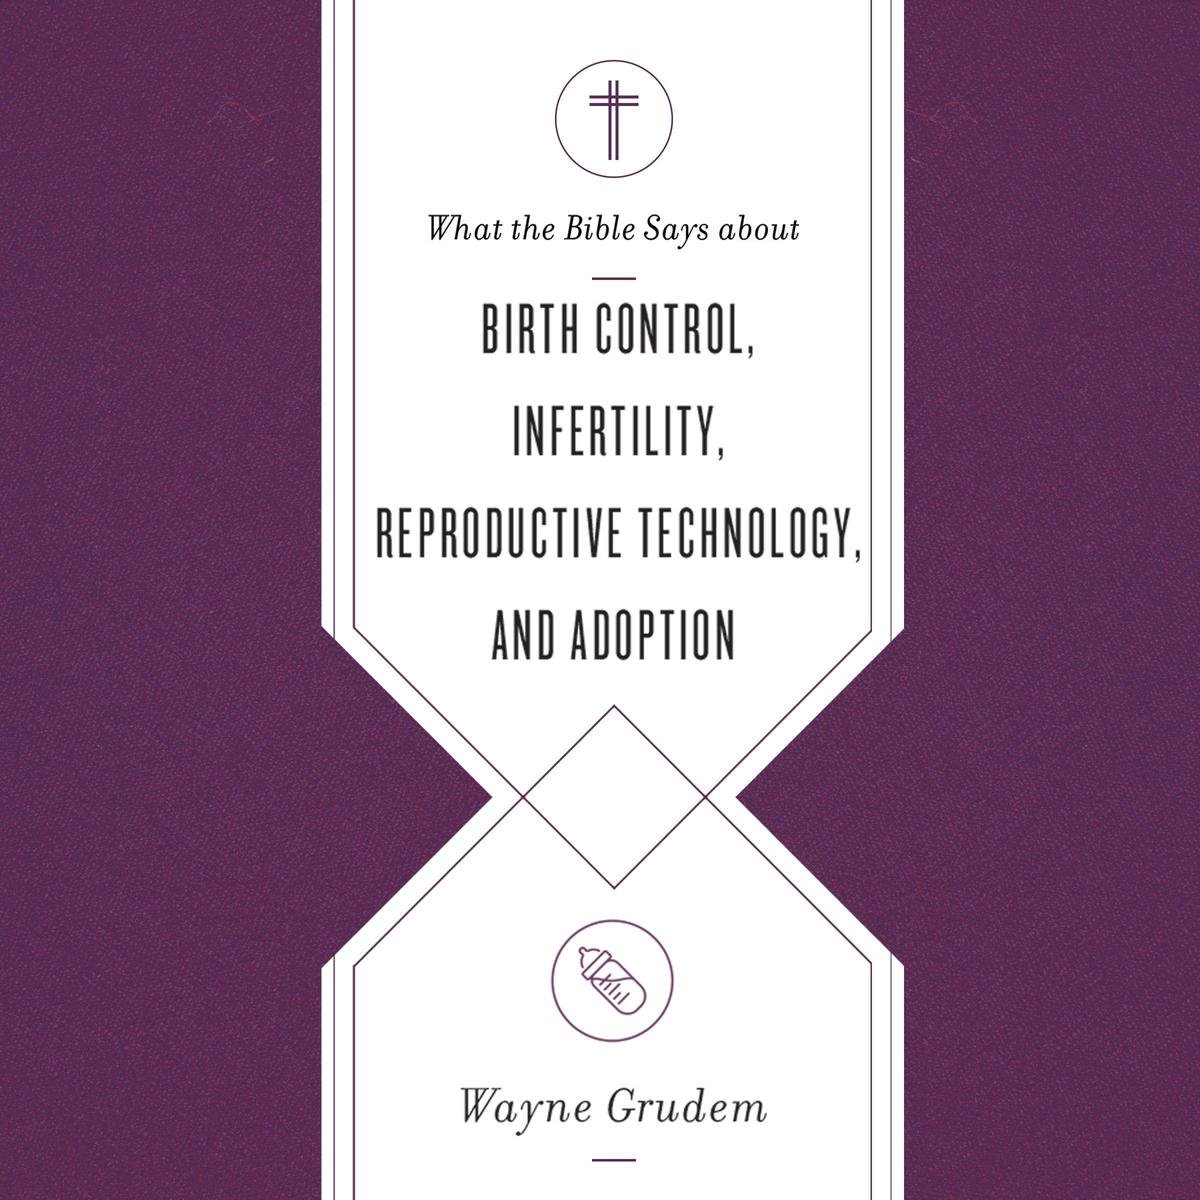 What the Bible Says about Birth Control, Infertility, Reproductive Technology, and Adoption - Wayne Grudem